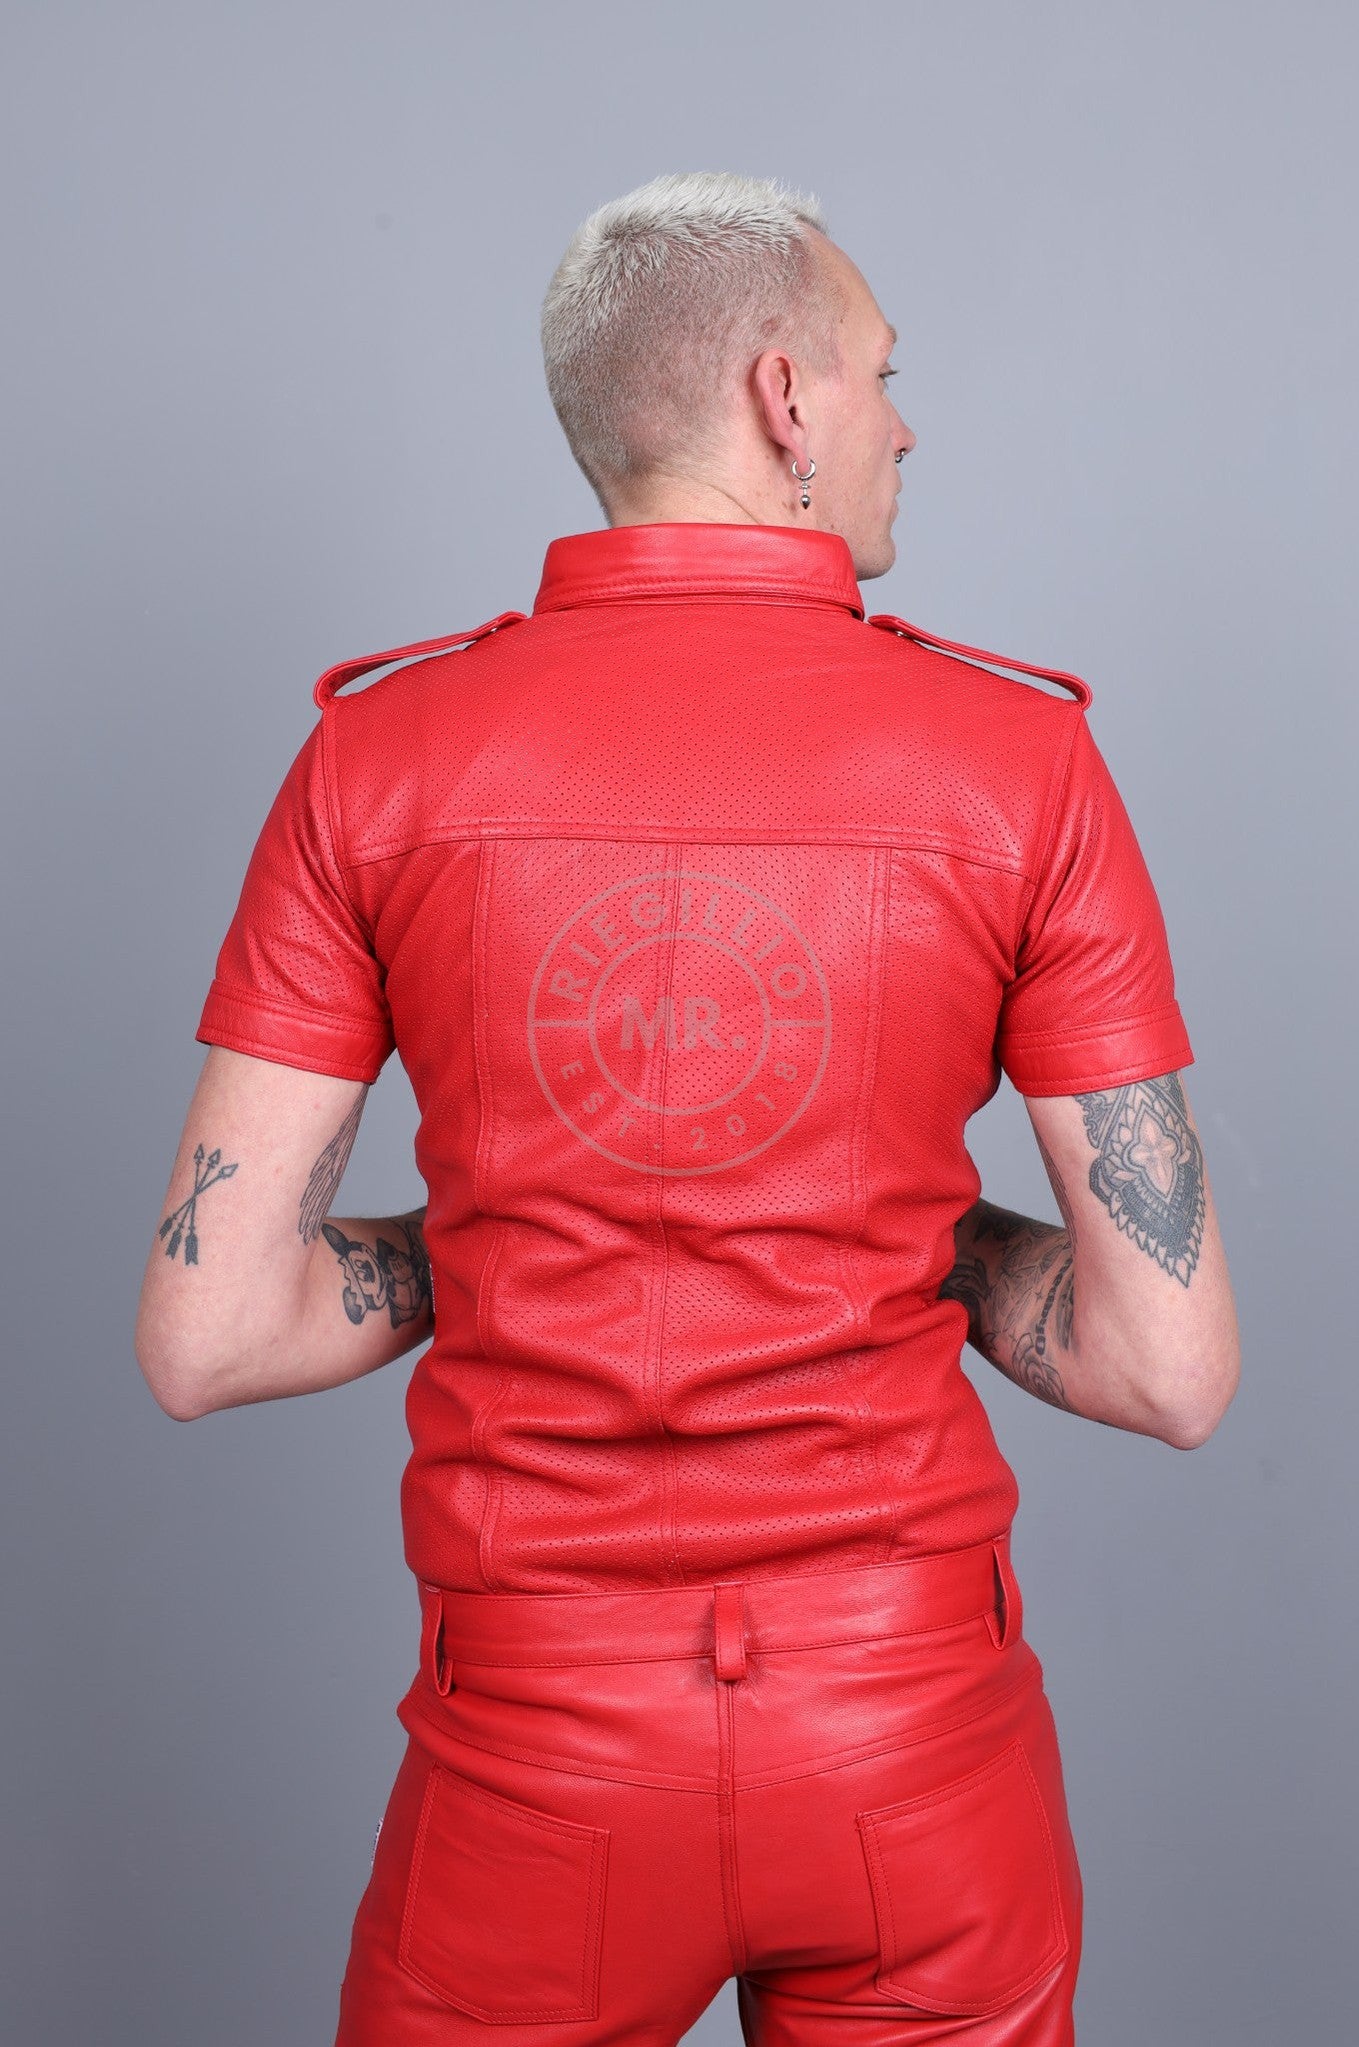 Red Leather Perforated Shirt-at MR. Riegillio